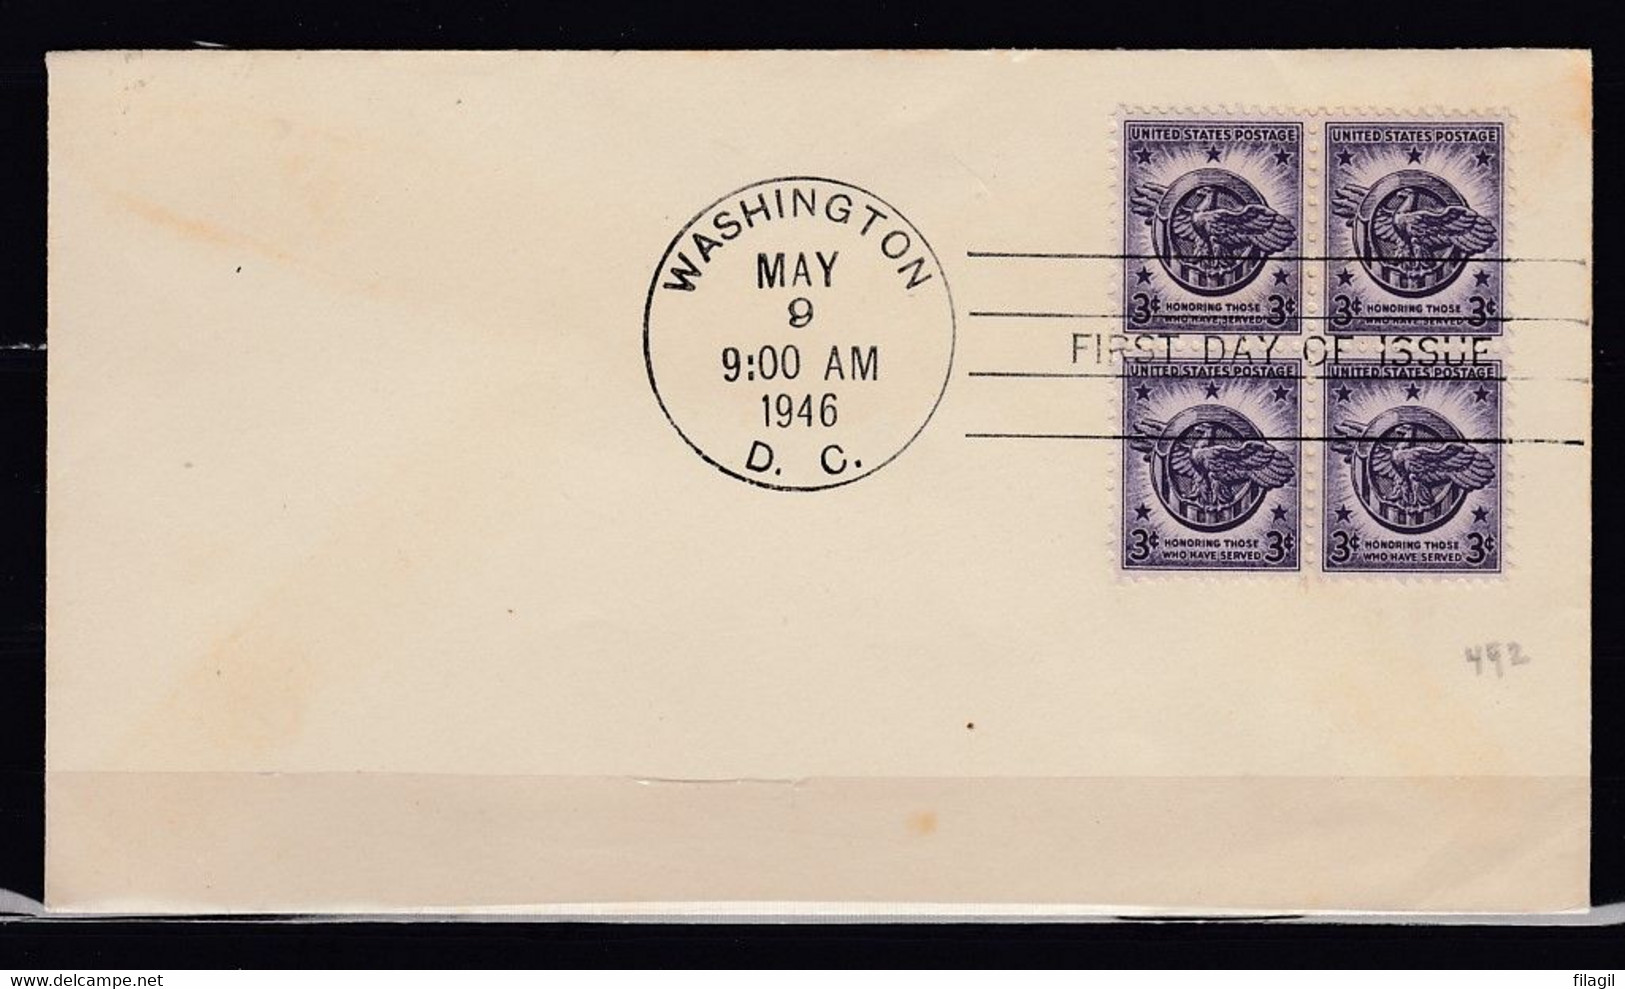 FDC Washington D.C. First Day Of Issue - 1941-1950